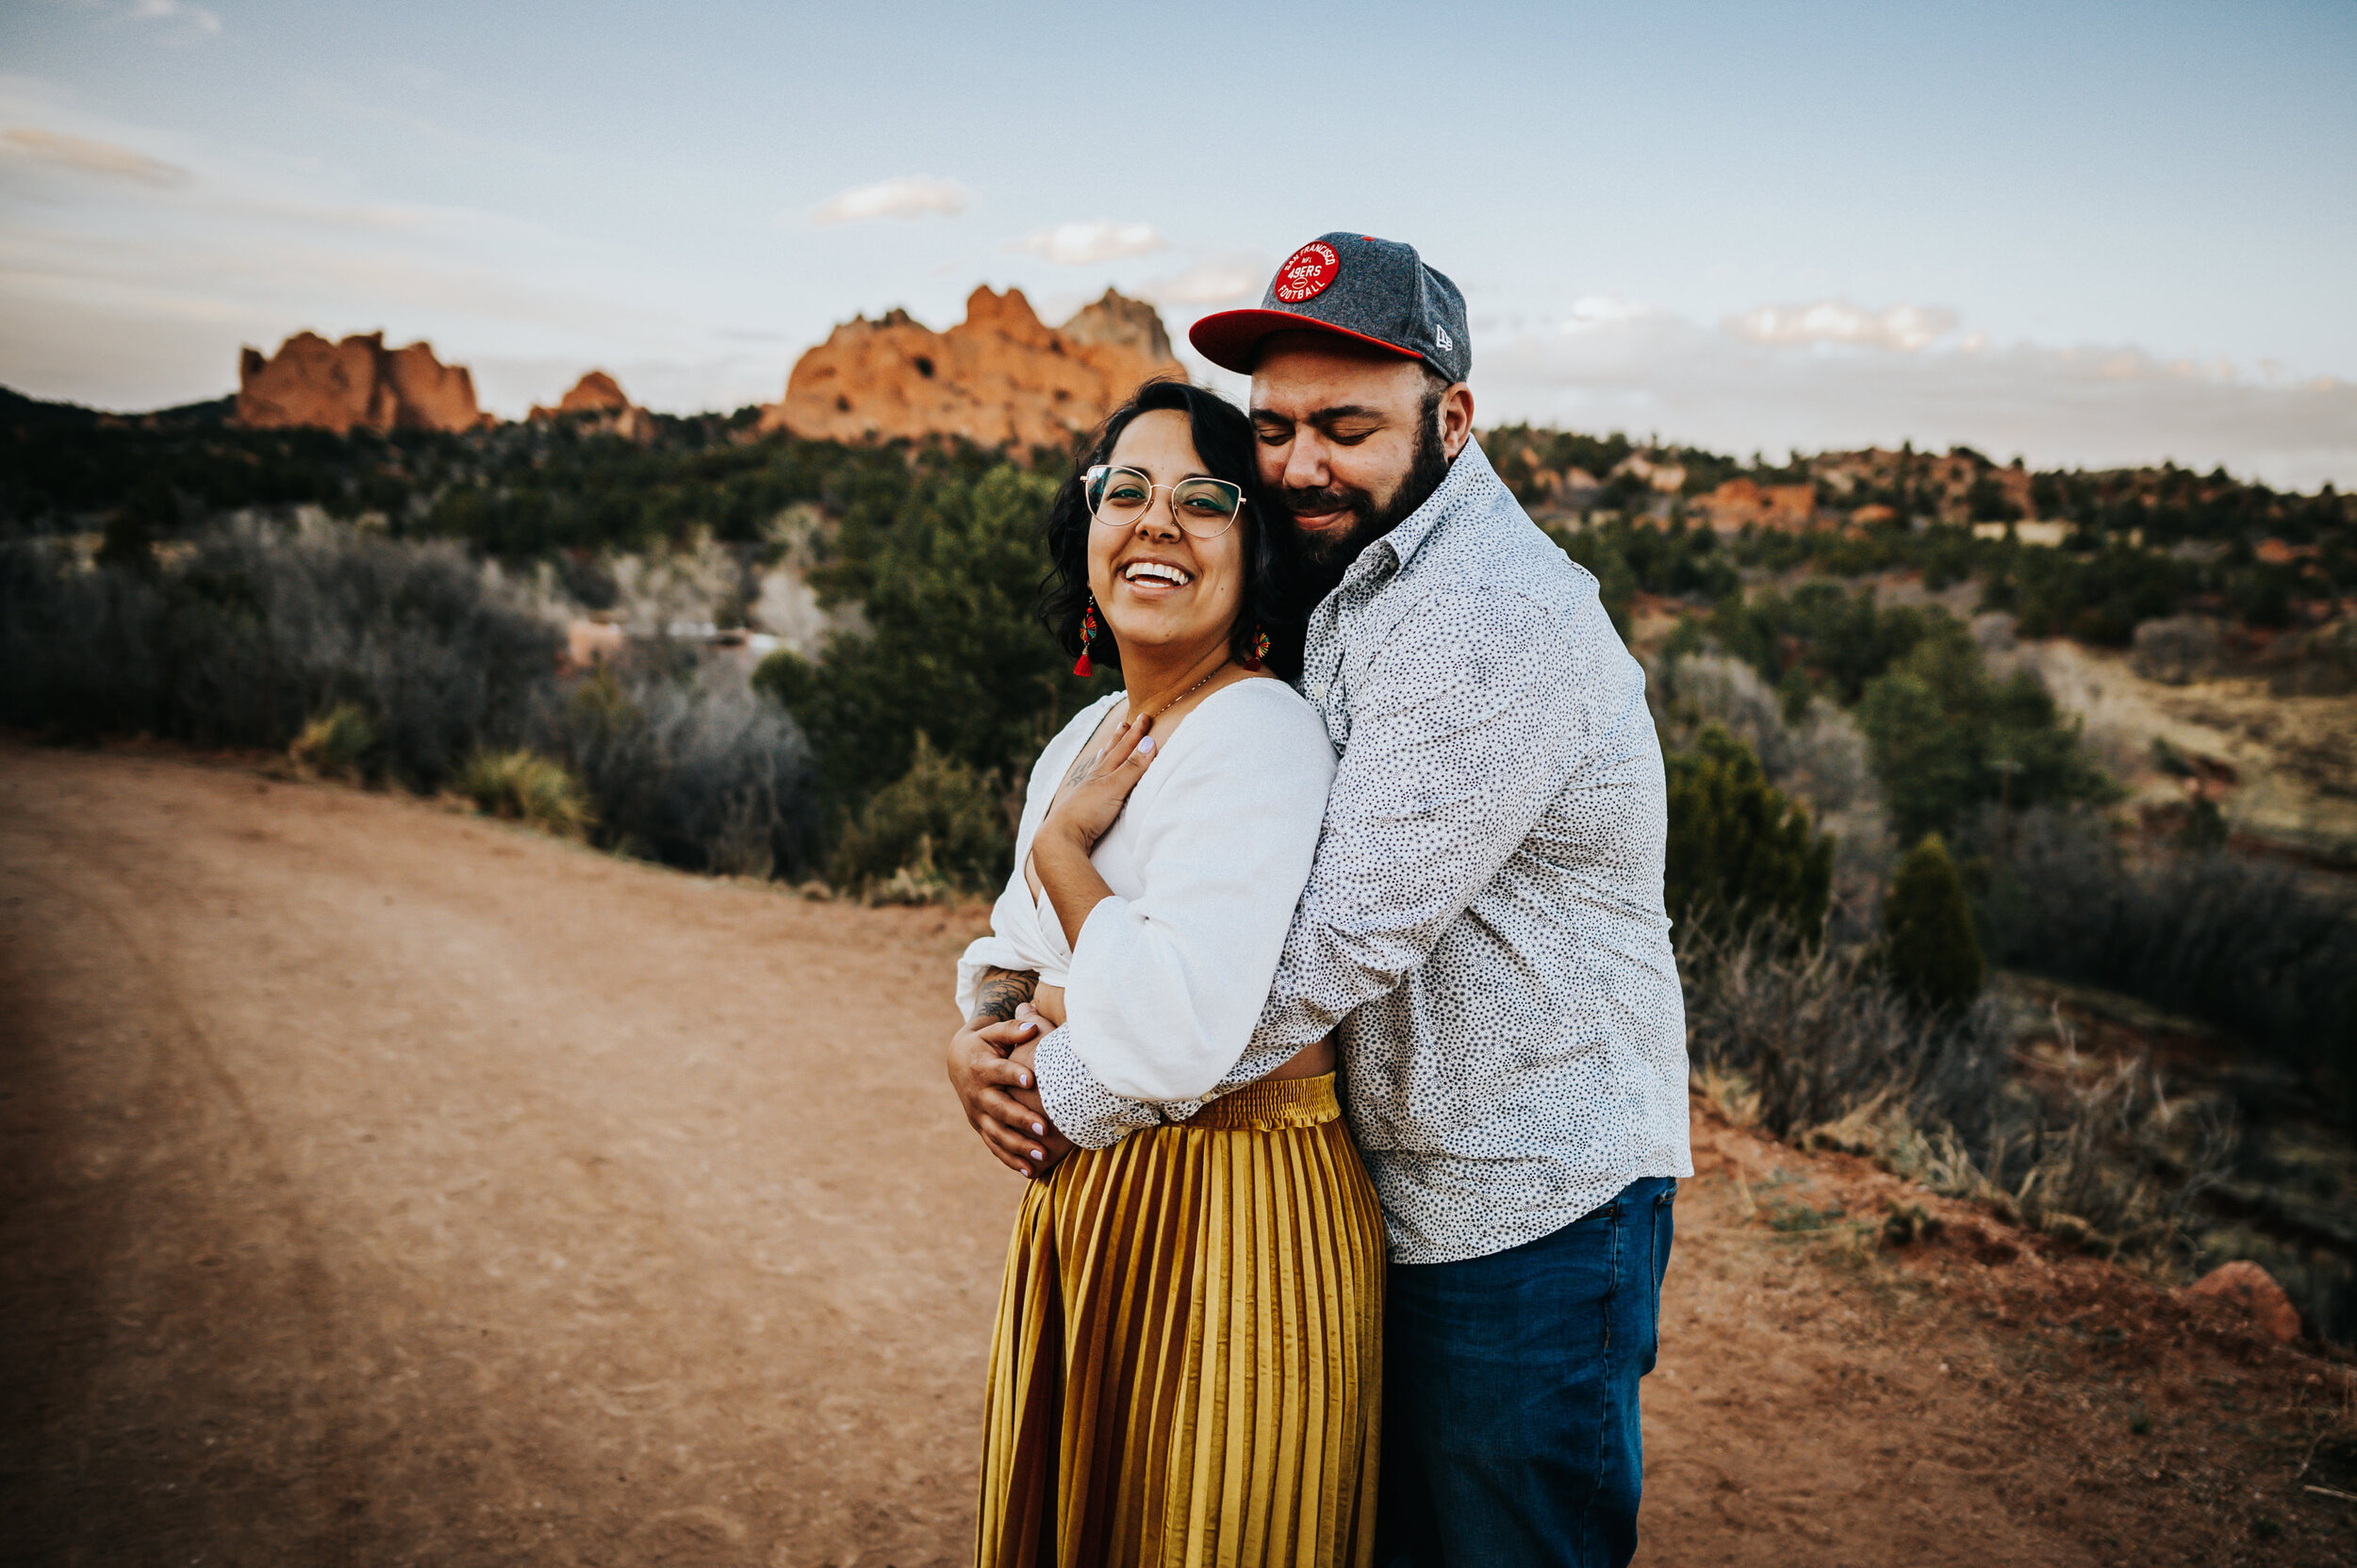 Caroline and Tommy Engagement Session Colorado Springs Colorado Garden of the Gods Wild Prairie Photography-11-2021.jpg